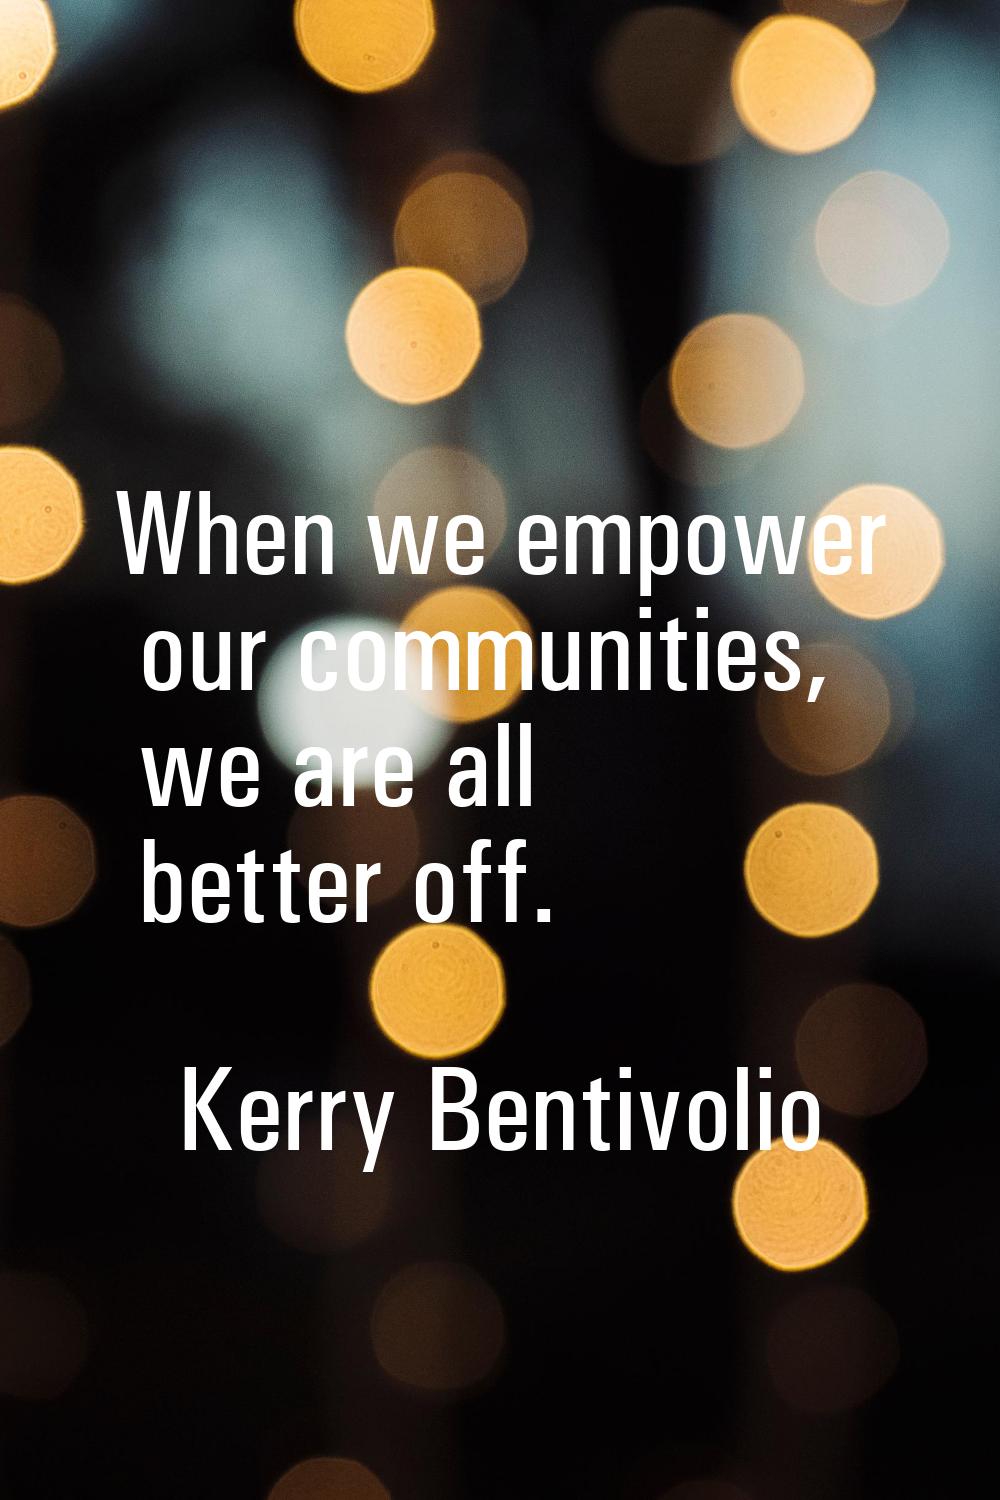 When we empower our communities, we are all better off.